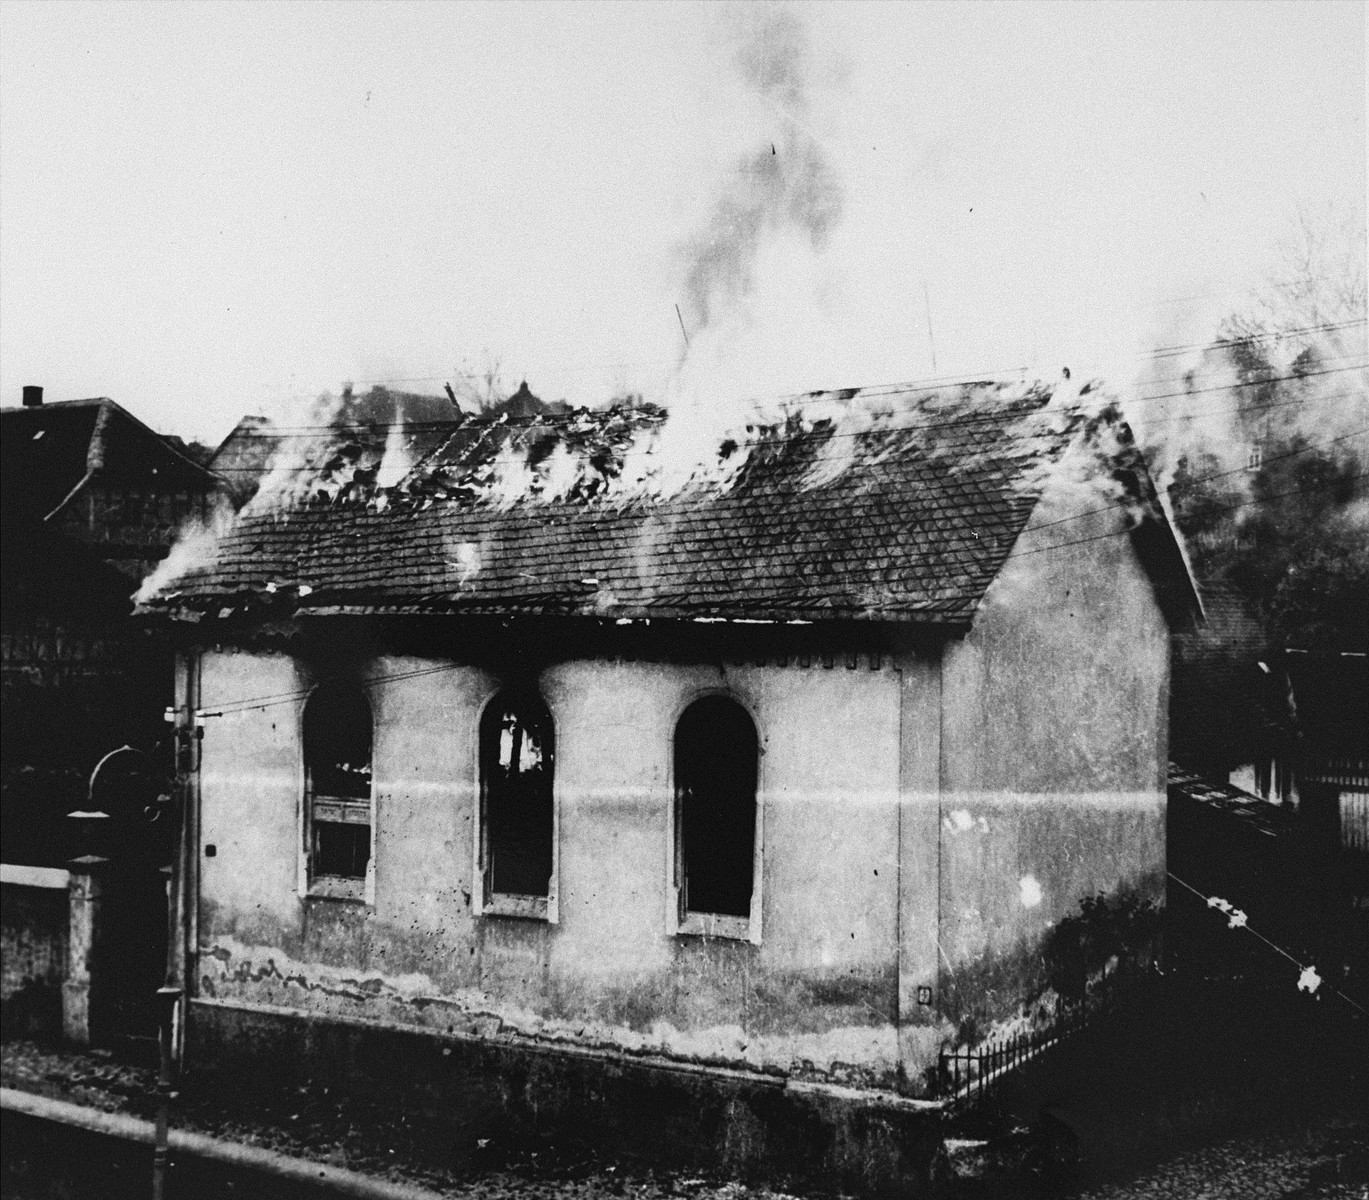 On the morning after Kristallnacht local residents watch as the Ober Ramstadt synagogue is destroyed by fire.   The local fire department prevented the fire from spreading to a nearby home, but did not try to limit the damage to the synagogue.

The youth who took the series of photographs of the burning synagogue in Ober-Ramstadt, Georg Schmidt,  came from a family that opposed the Nazis.  The film was confiscated by police from Schmidt's home the same day the photos were taken, and developed immediately.  The prints and negatives were stored in the city hall until a policeman in the service of the American occupation found them and removed them.  The son-in-law of the policeman found them in a toolbox and donated them to the city archive.